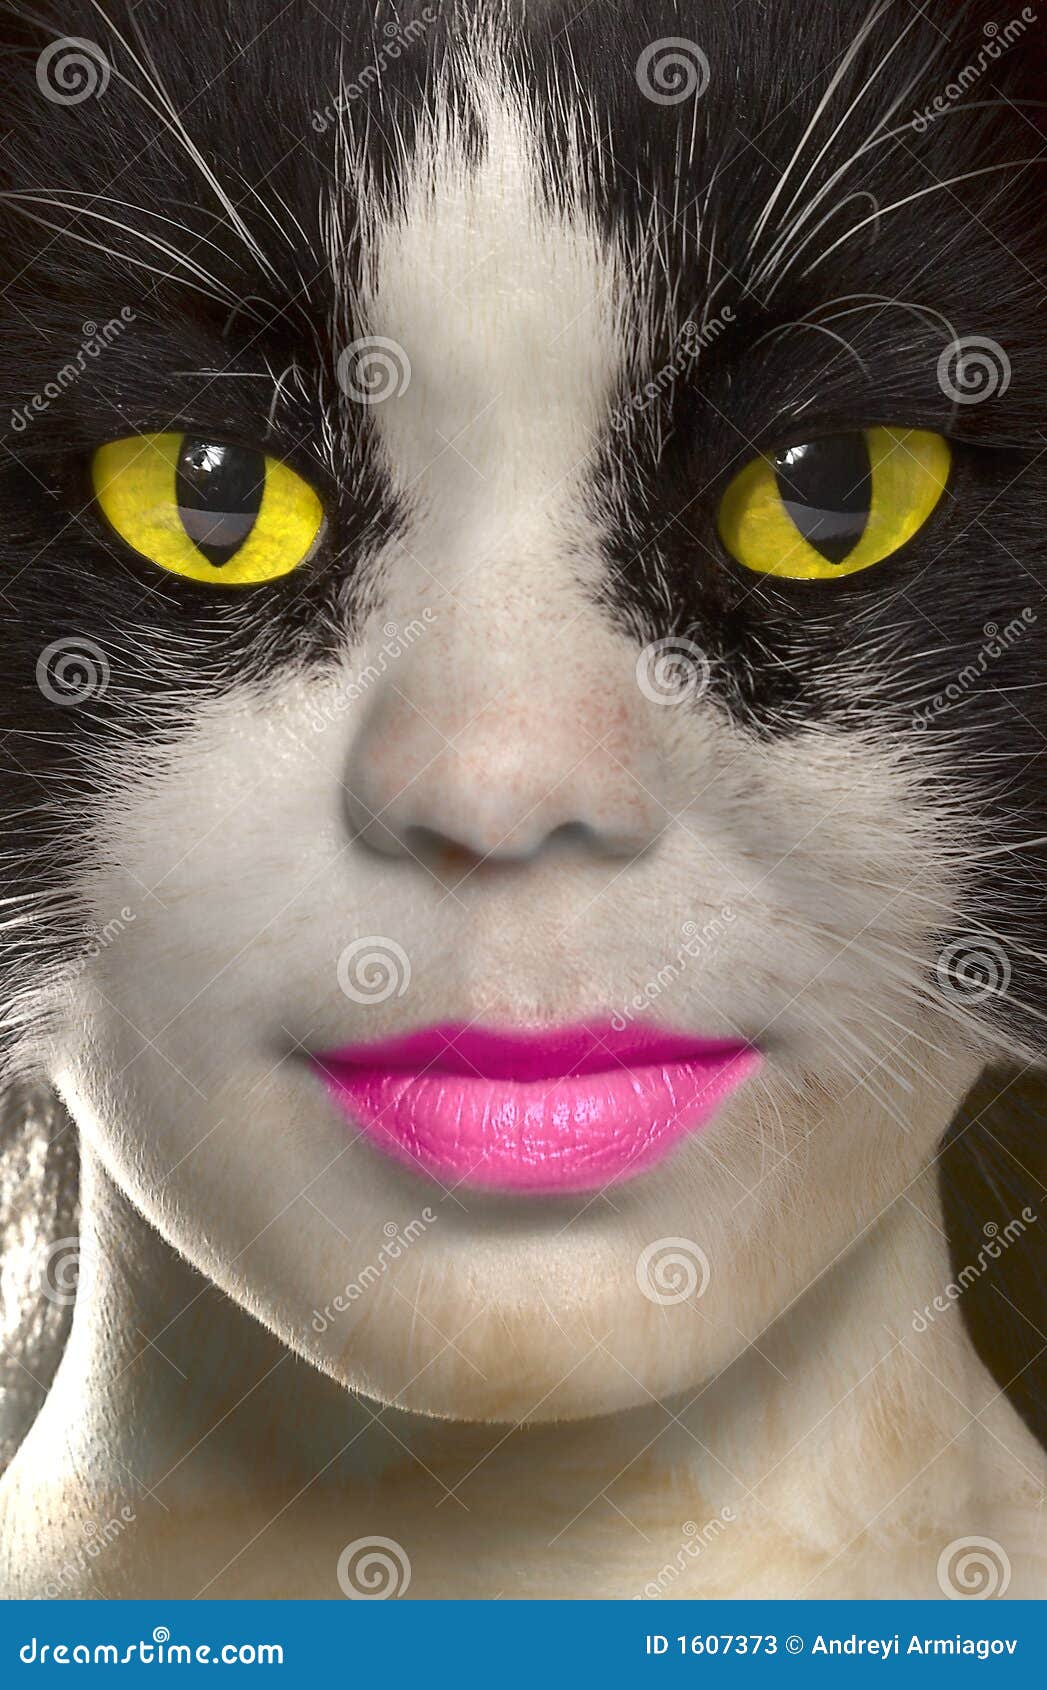 catwoman with brightly yellow eyes